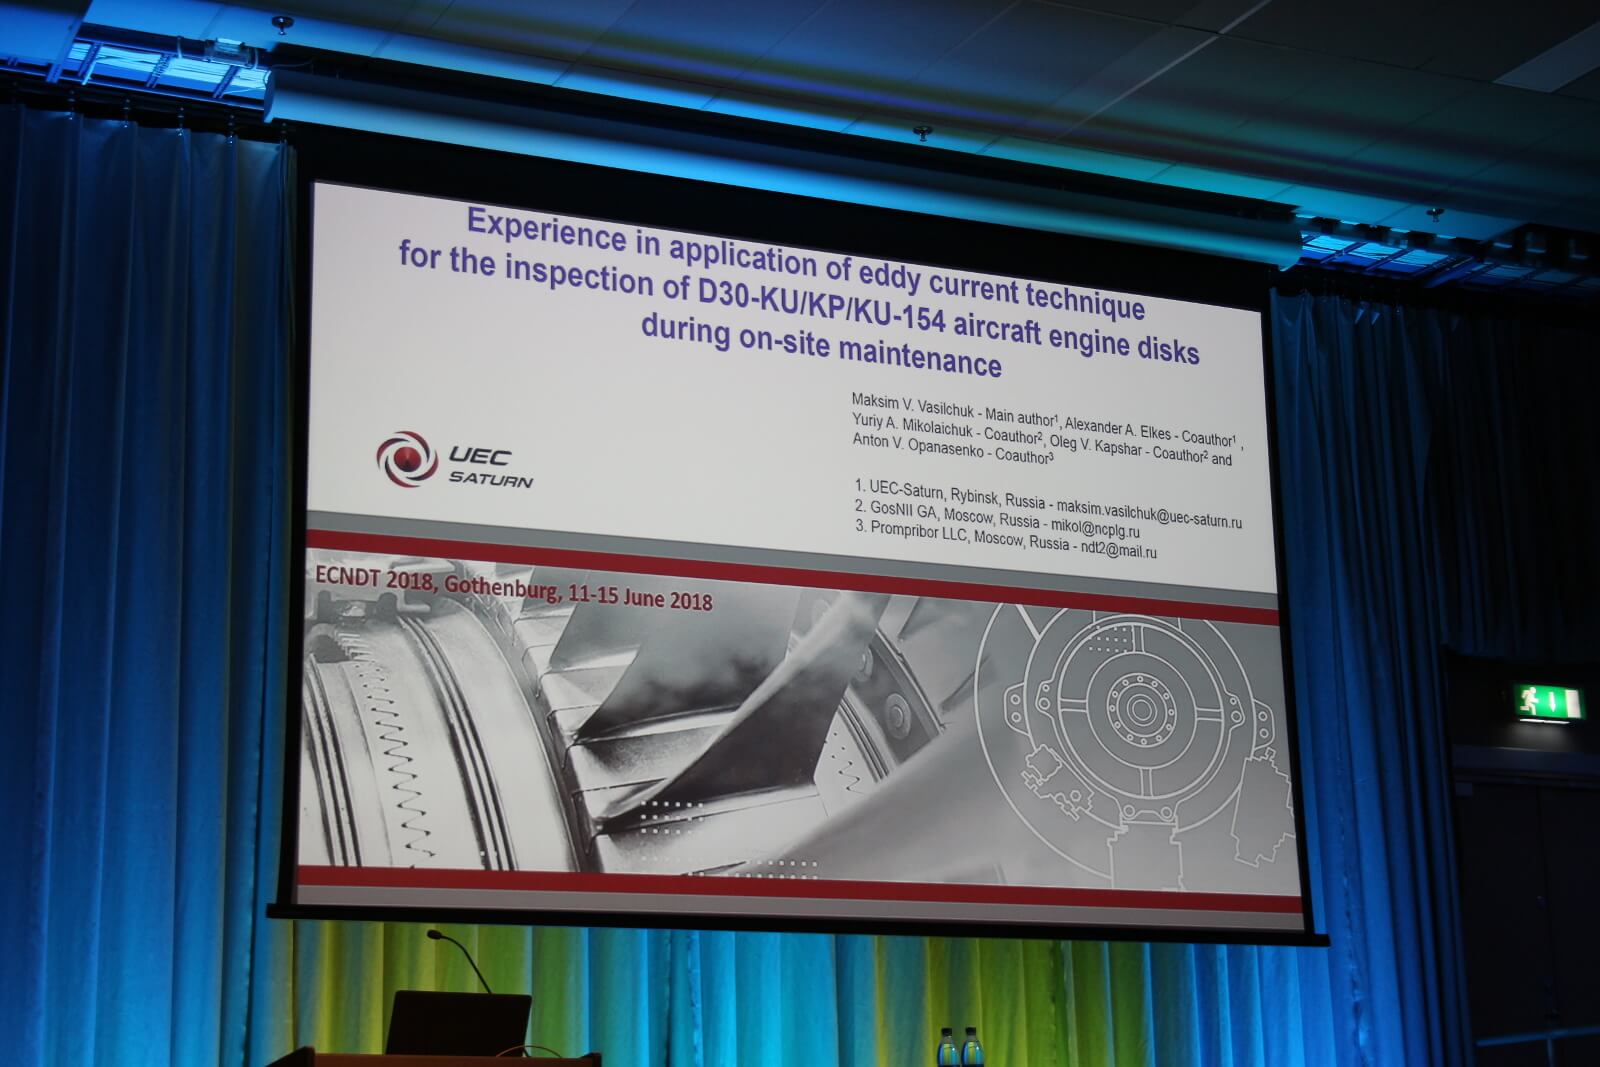 Presentation of the use of the eddy current method for testing aircraft engine disks within the framework of the Conference ECNDT-18, Gothenburg (Sweden)